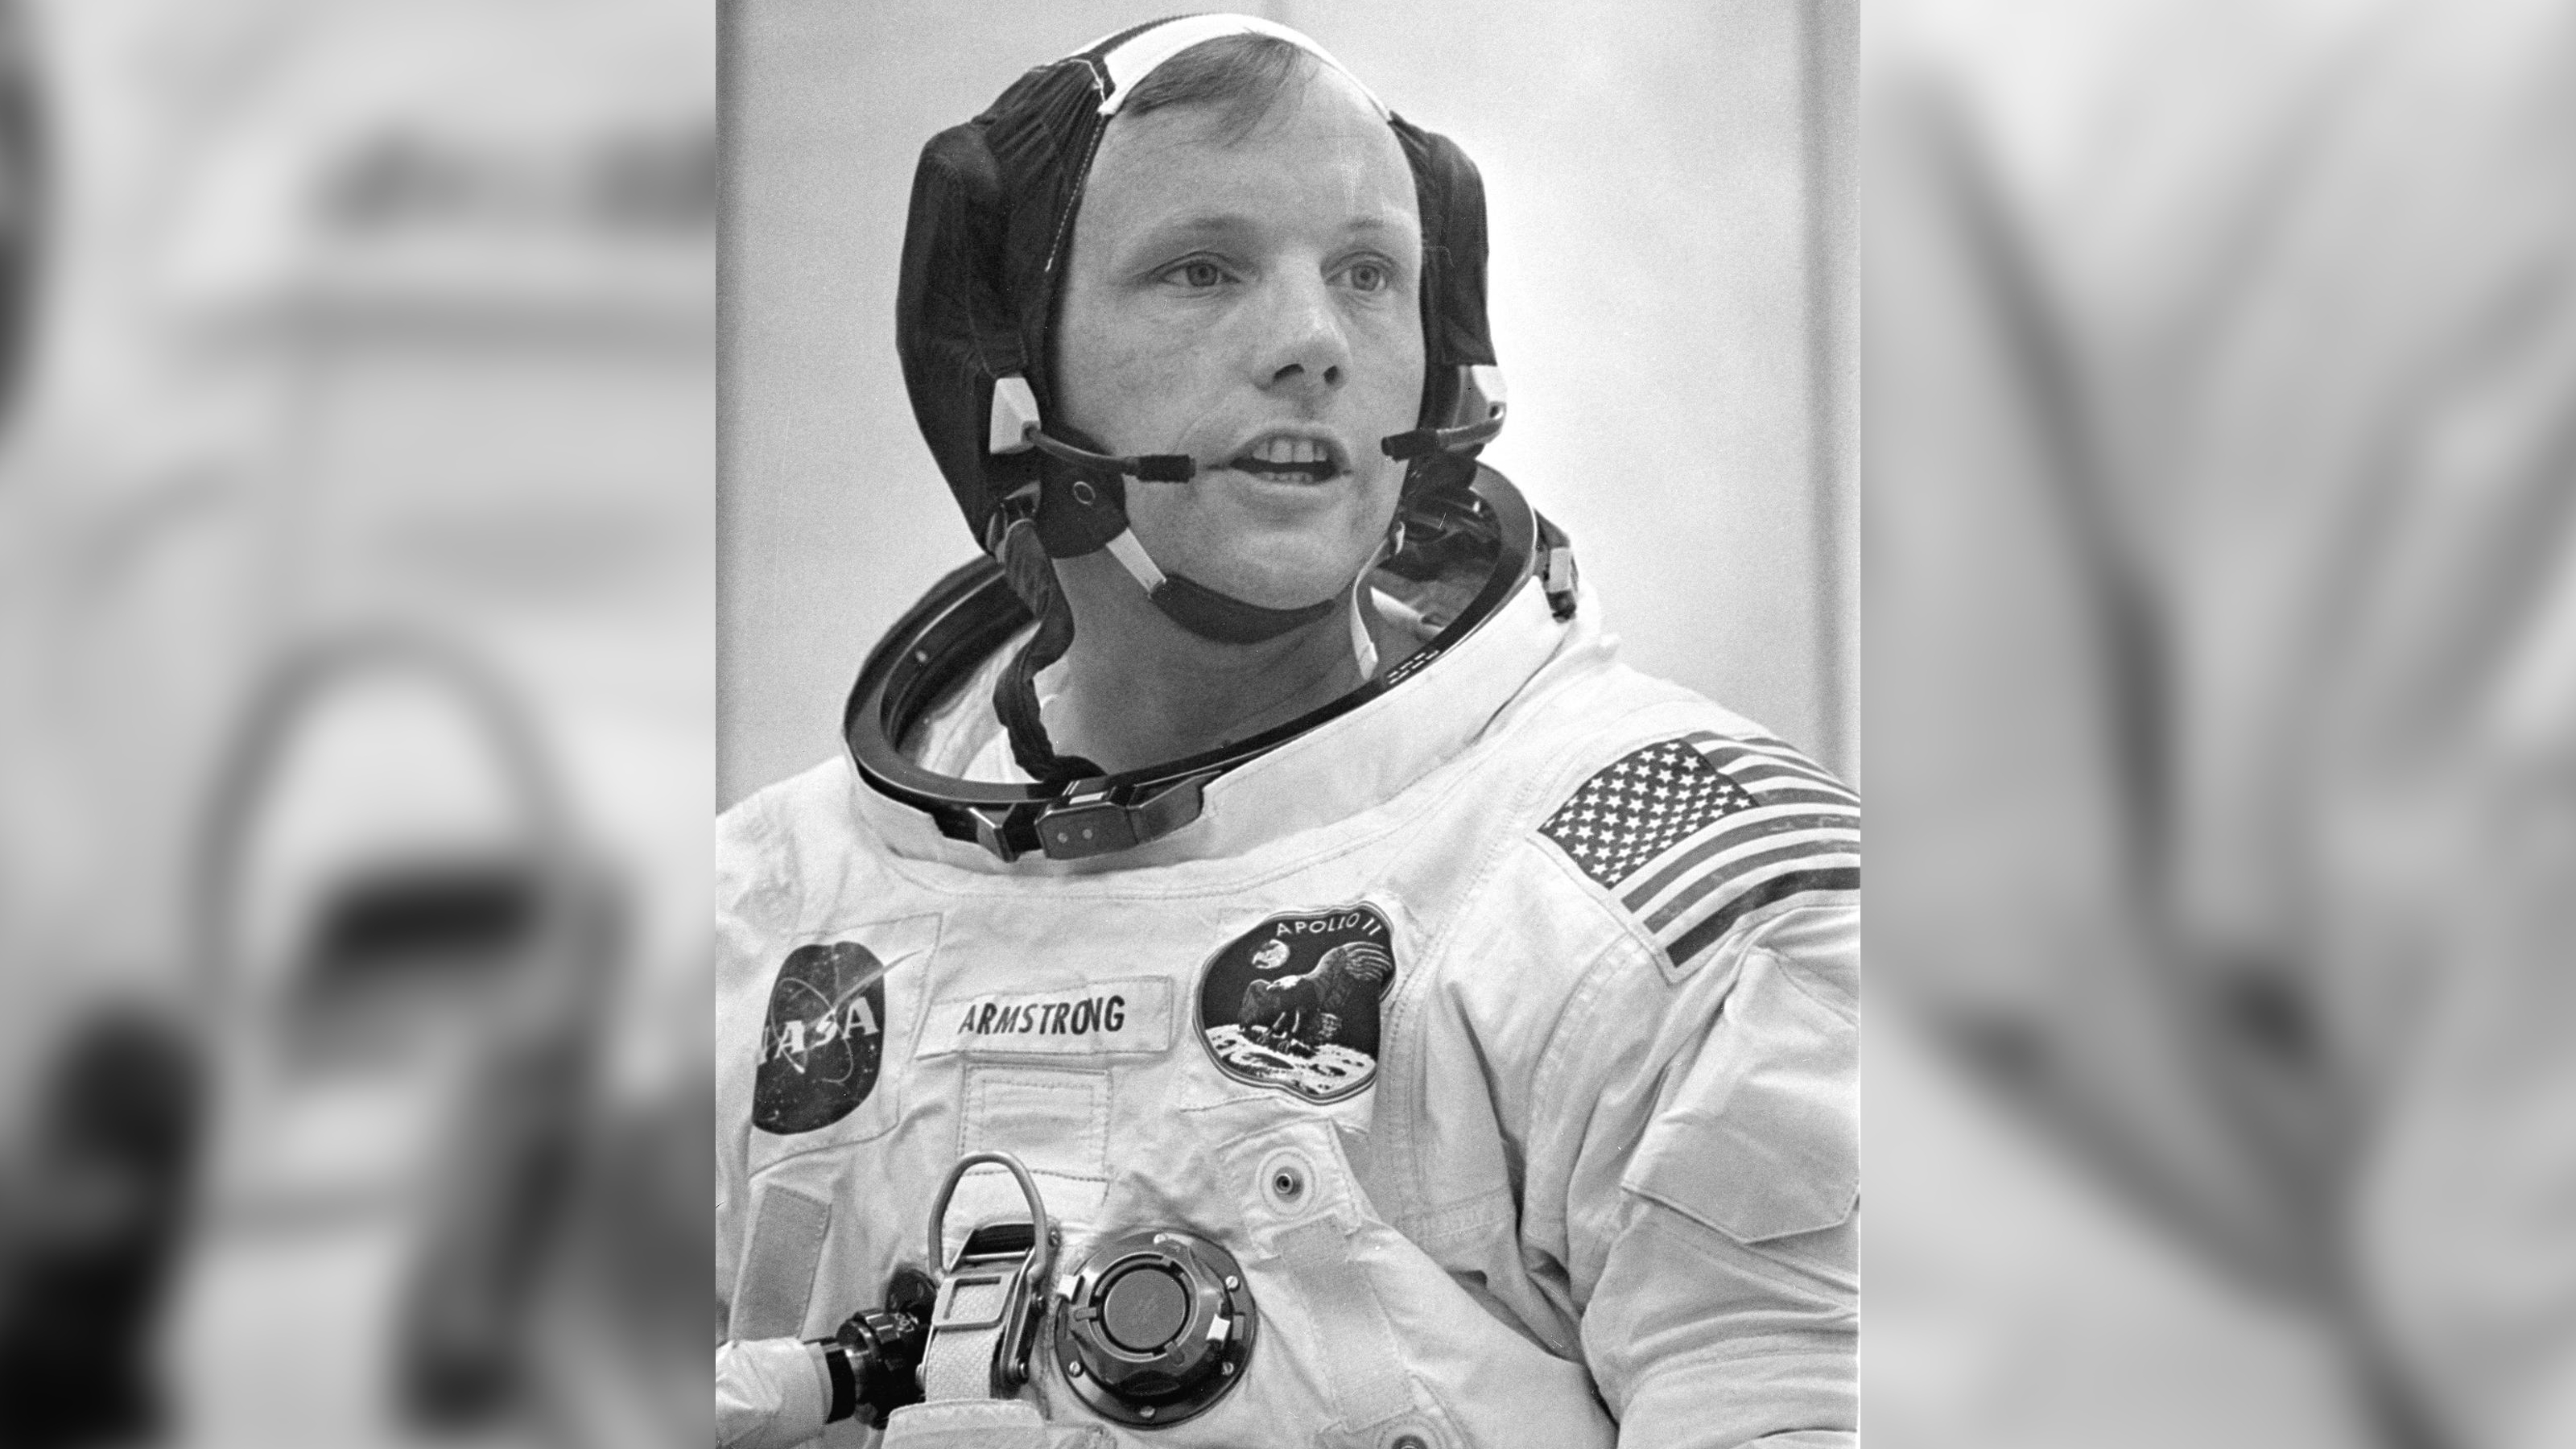 Two School Girl One Man Xxx Video - Neil Armstrong: First Man on the Moon | Space